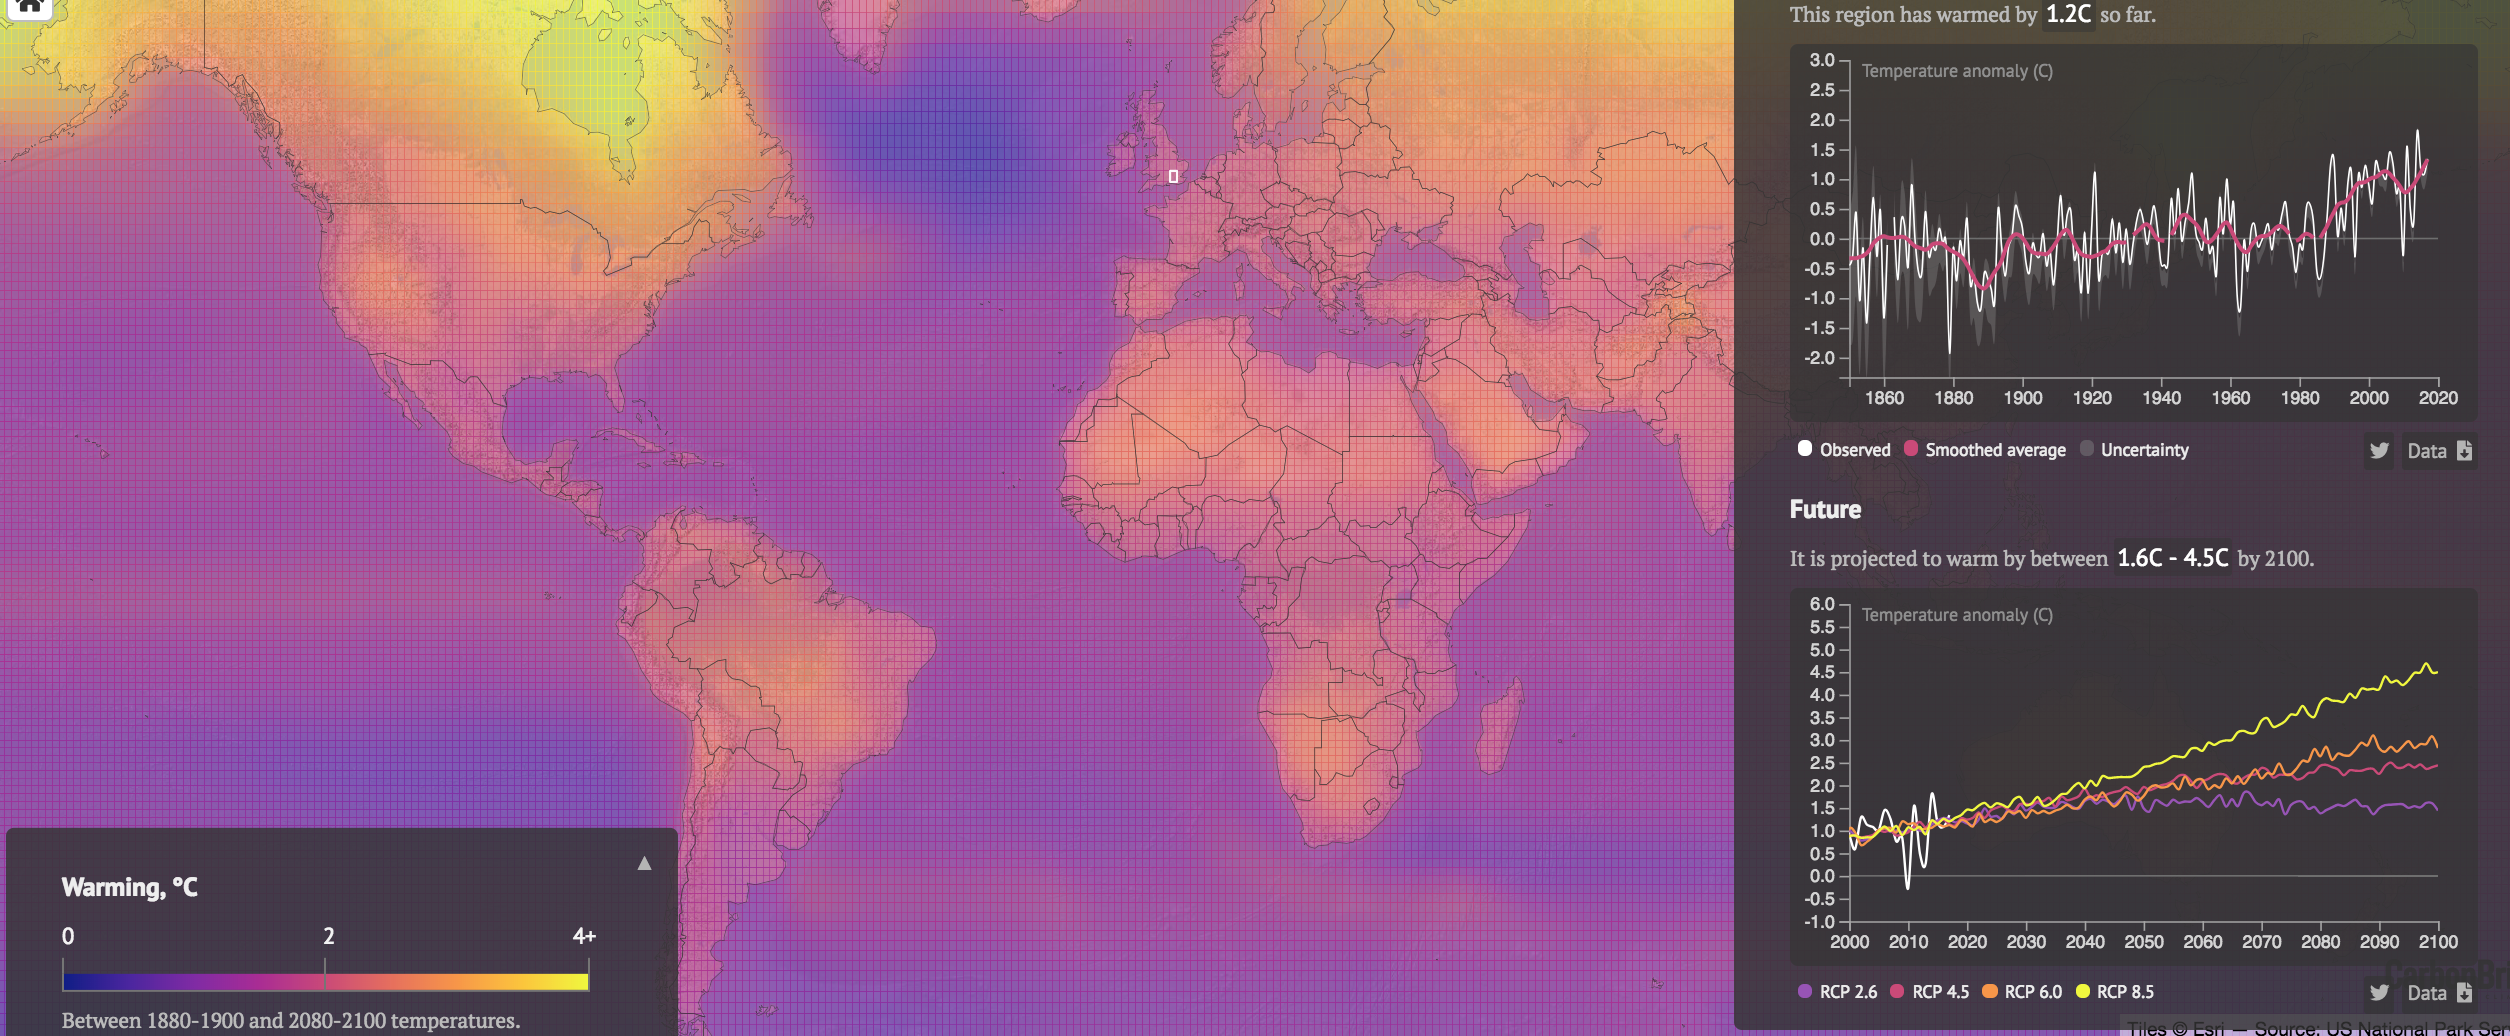 Mapped__How_every_part_of_the_world_has_warmed_-_and_could_continue_to_warm___Carbon_Brief